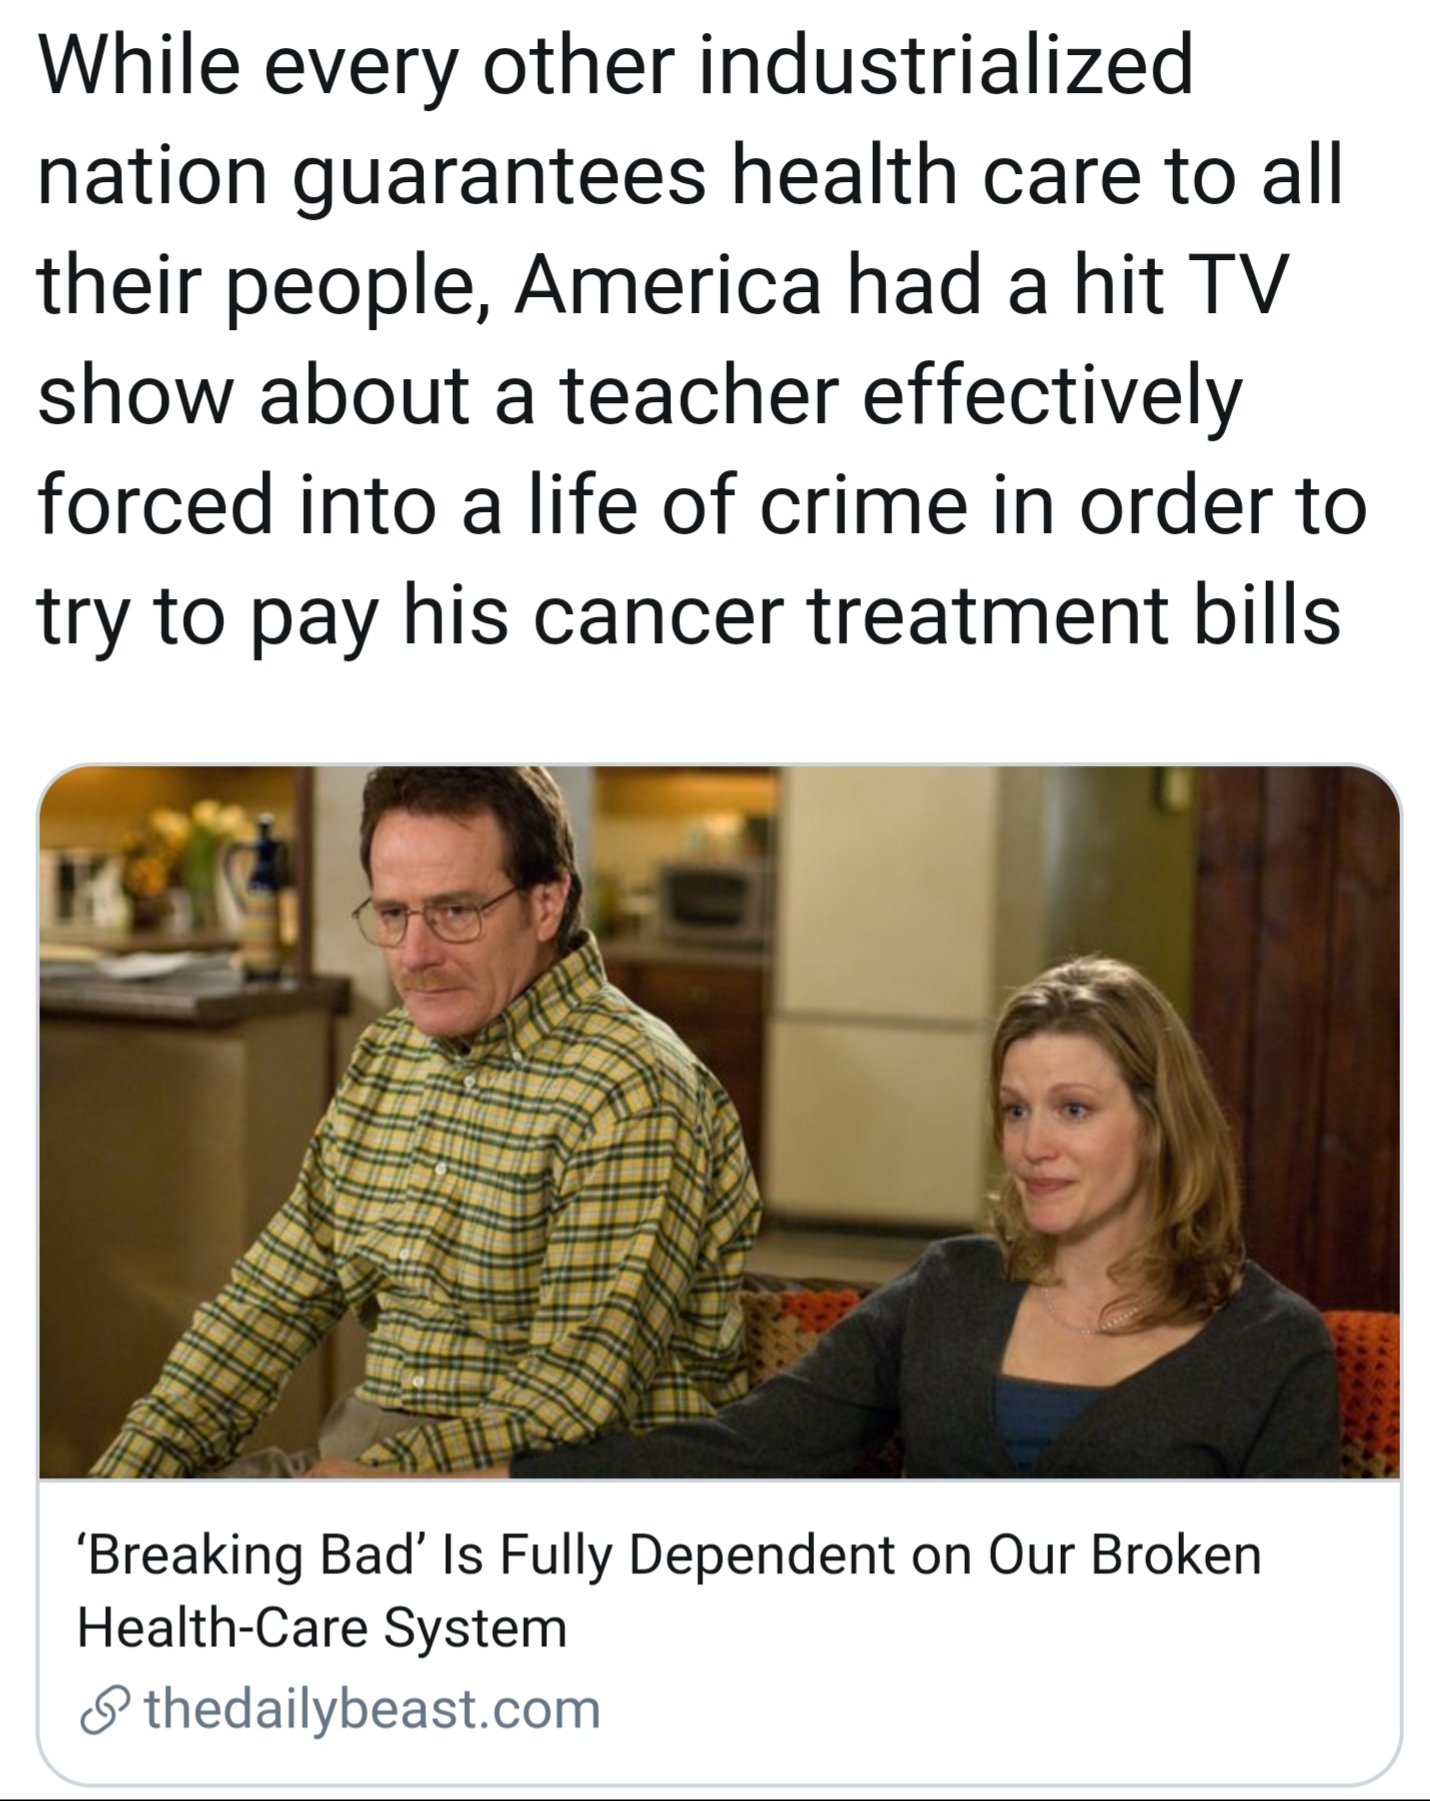 human behavior - While every other industrialized nation guarantees health care to all their people, America had a hit Tv show about a teacher effectively forced into a life of crime in order to try to pay his cancer treatment bills 'Breaking Bad' Is Full